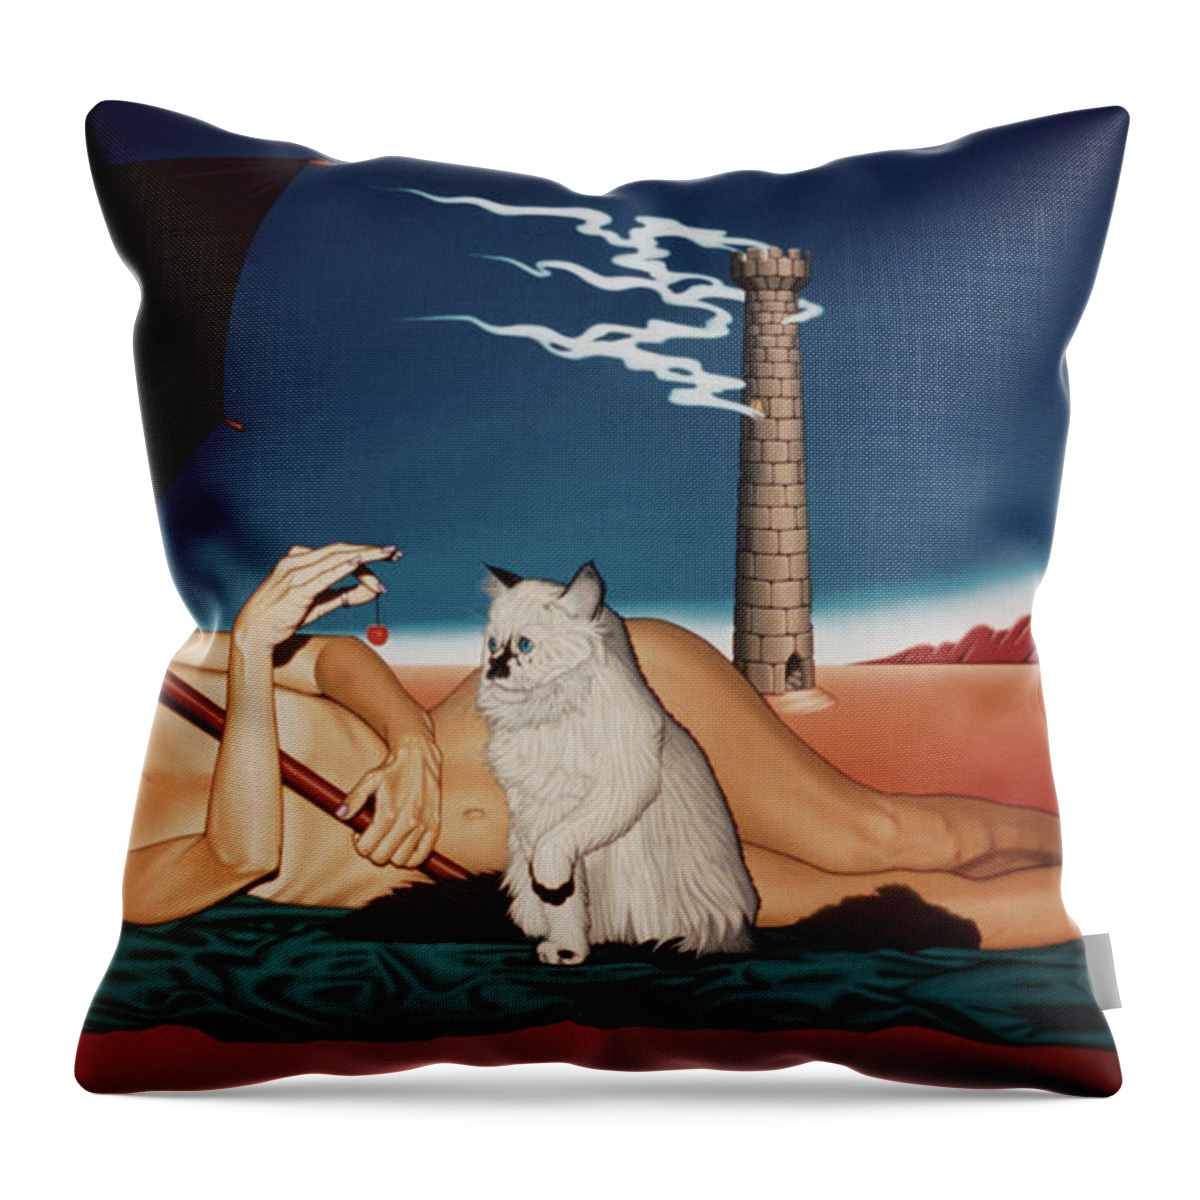  Throw Pillow featuring the painting Romeo's Nightmare by Paxton Mobley